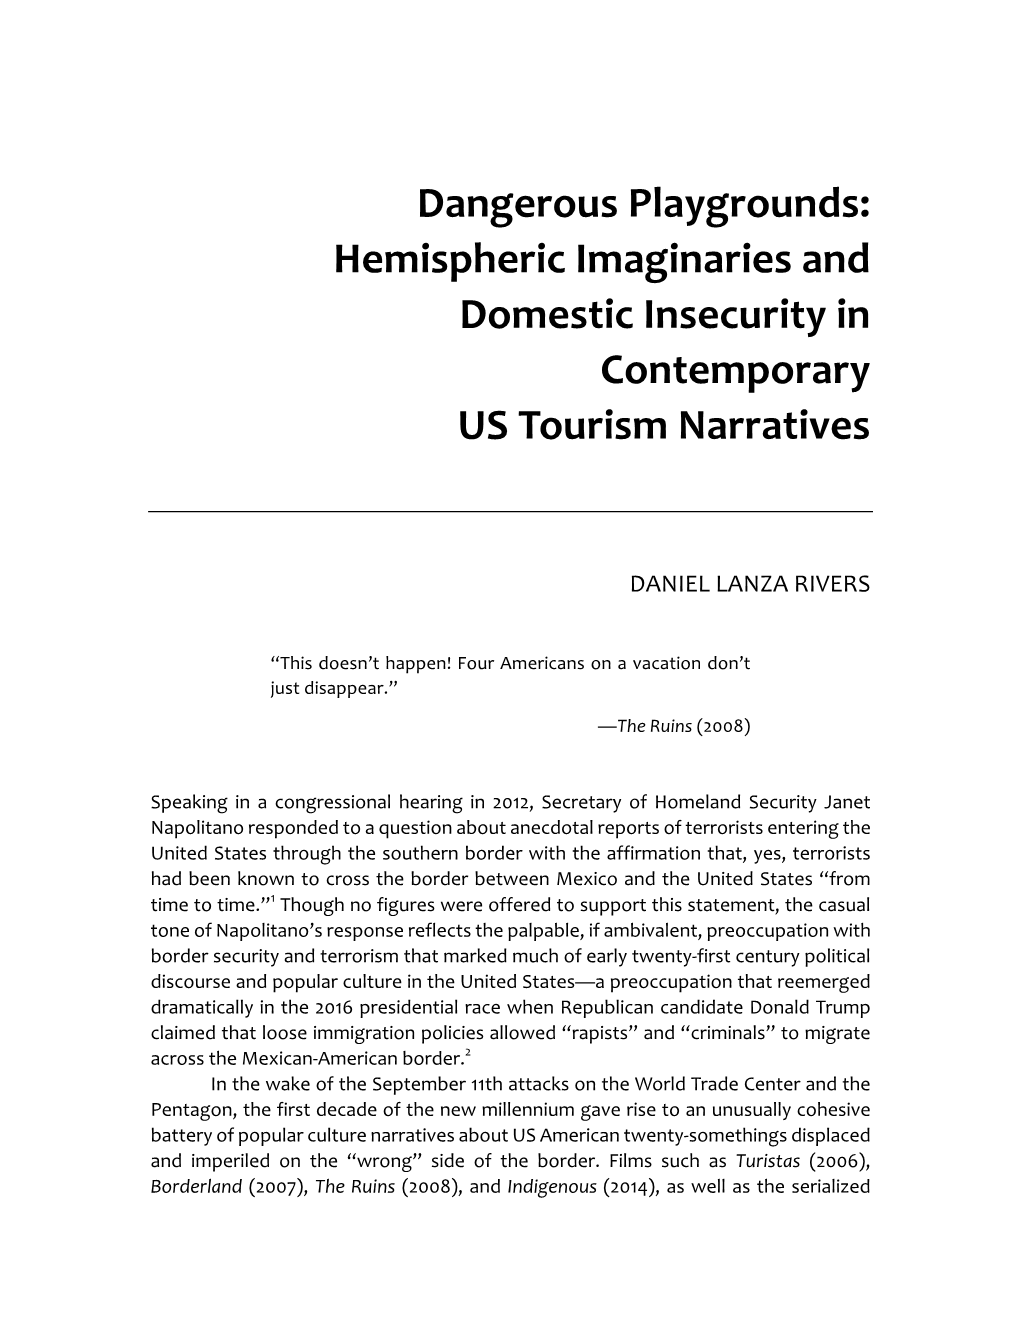 Hemispheric Imaginaries and Domestic Insecurity in Contemporary US Tourism Narratives